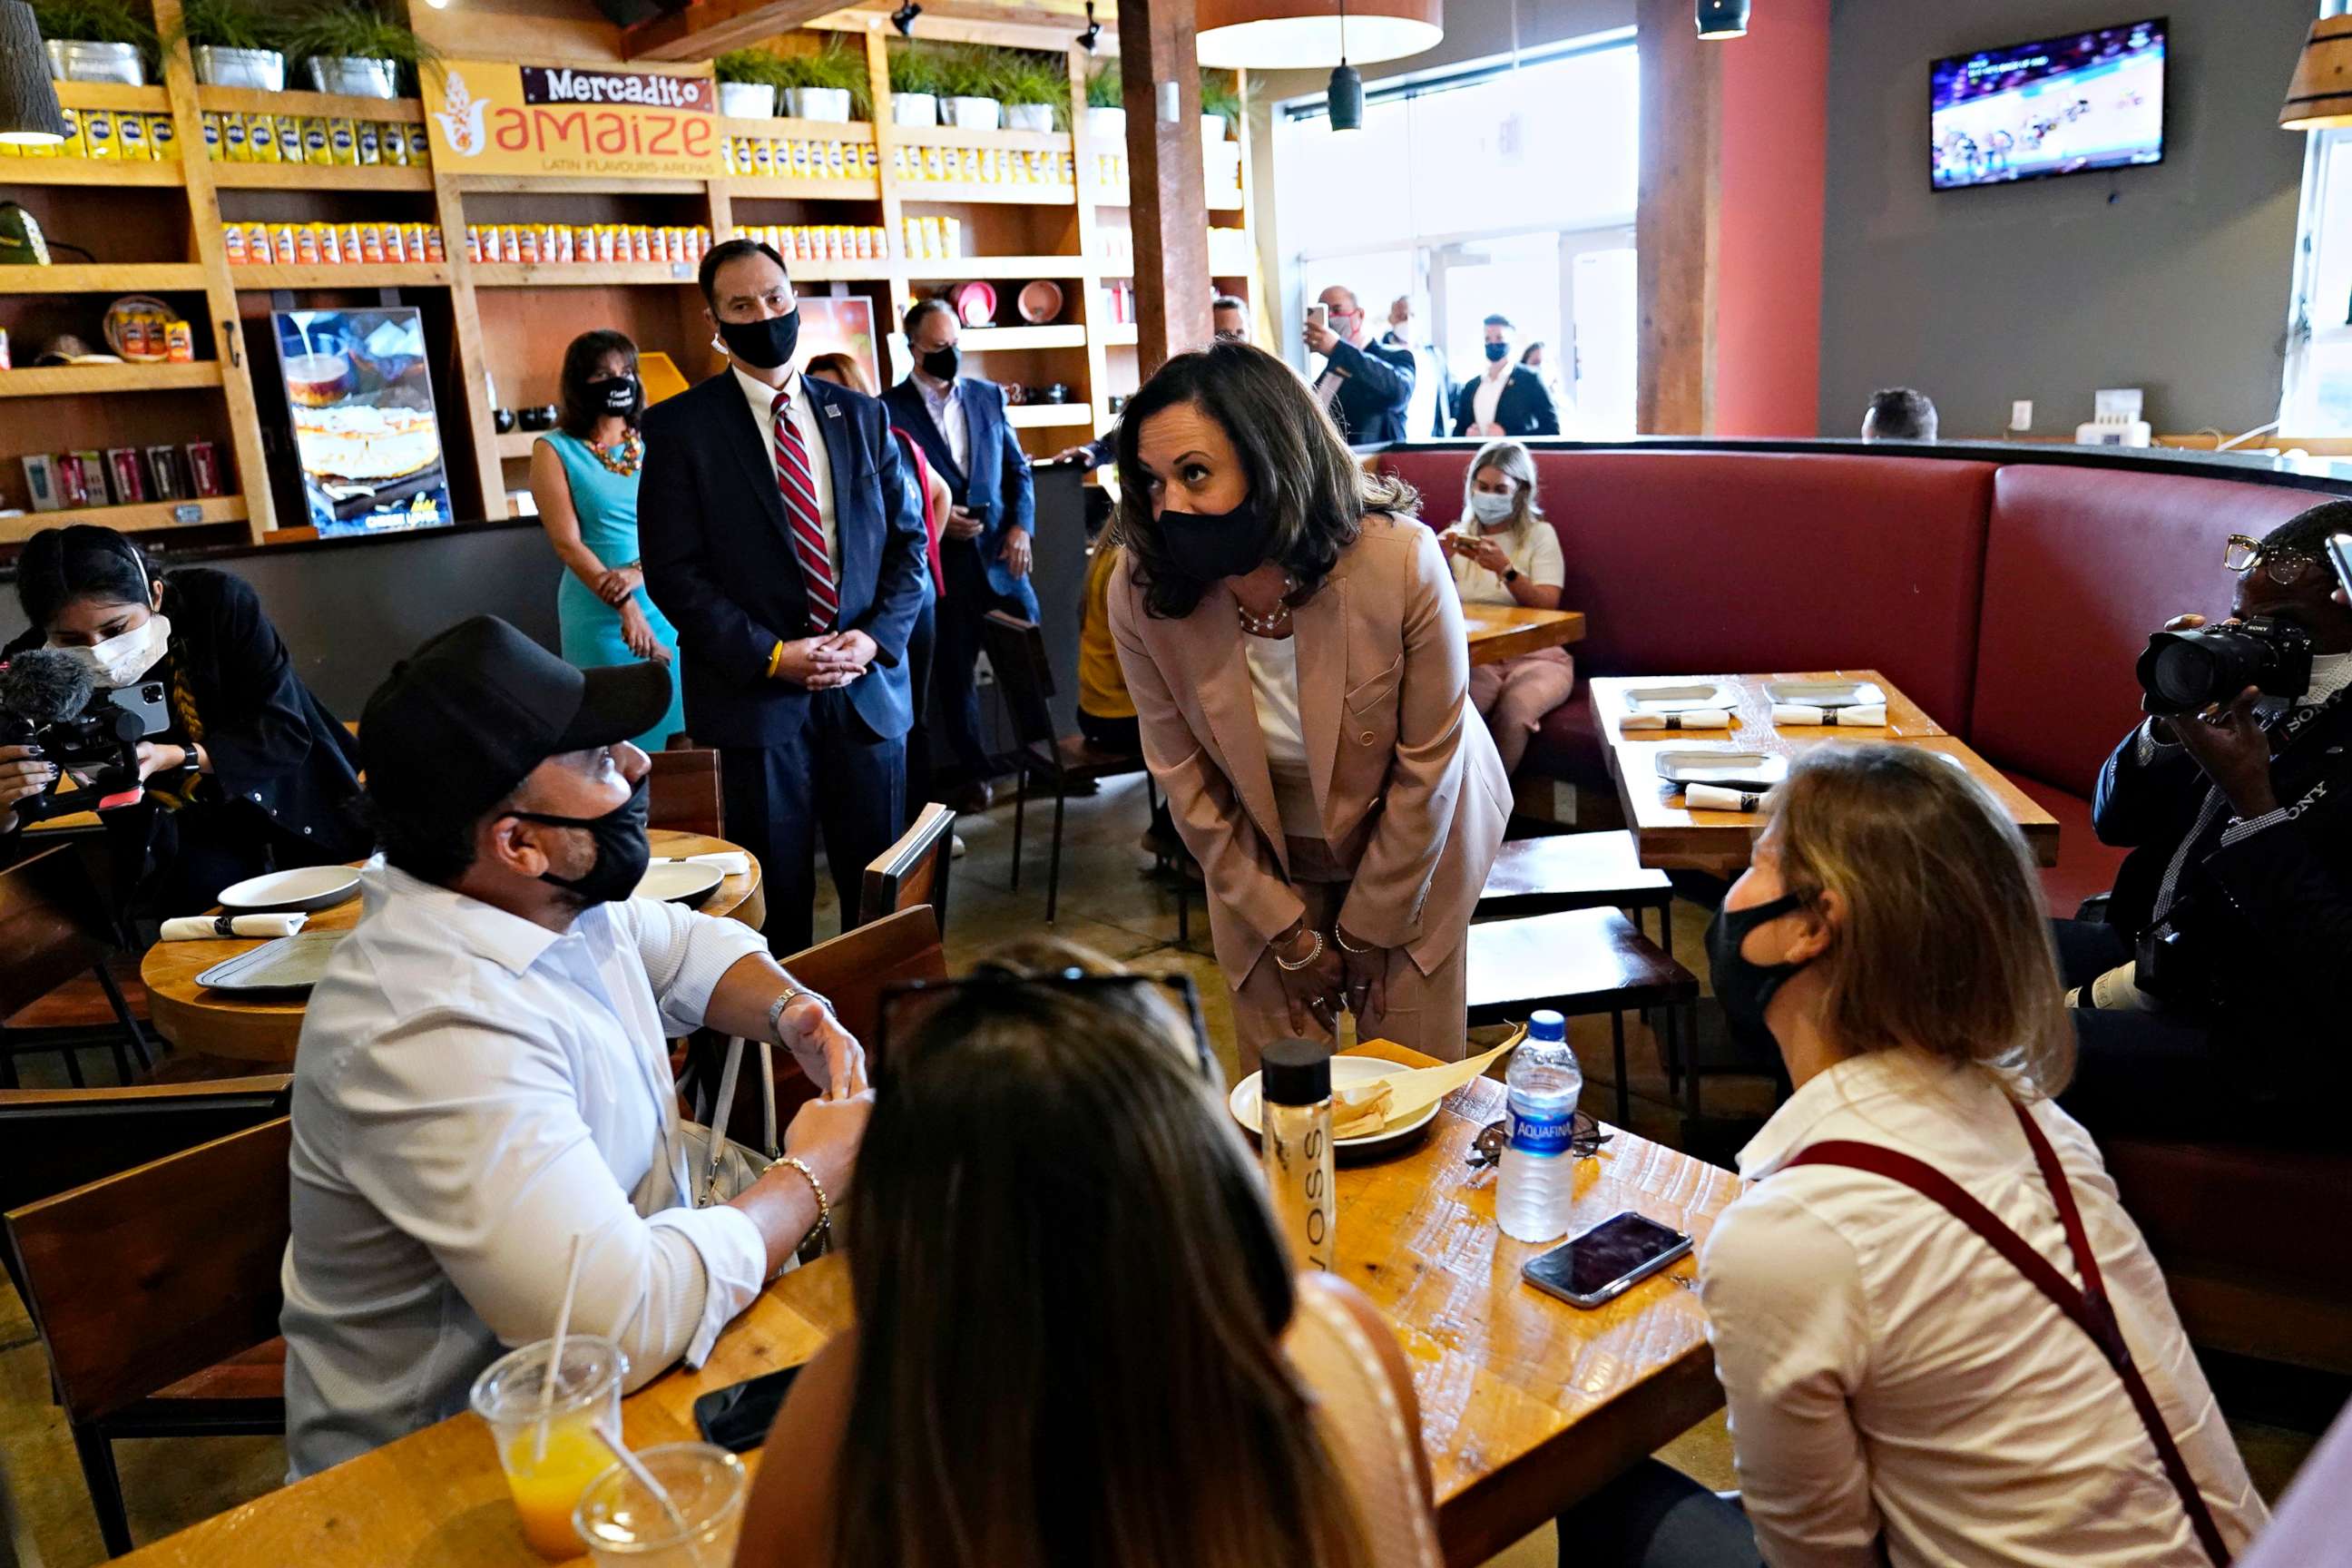 PHOTO: Democratic vice presidential candidate Sen. Kamala Harris meets with people at Amaize restaurant, Sept. 10, 2020, in Doral, Fla.